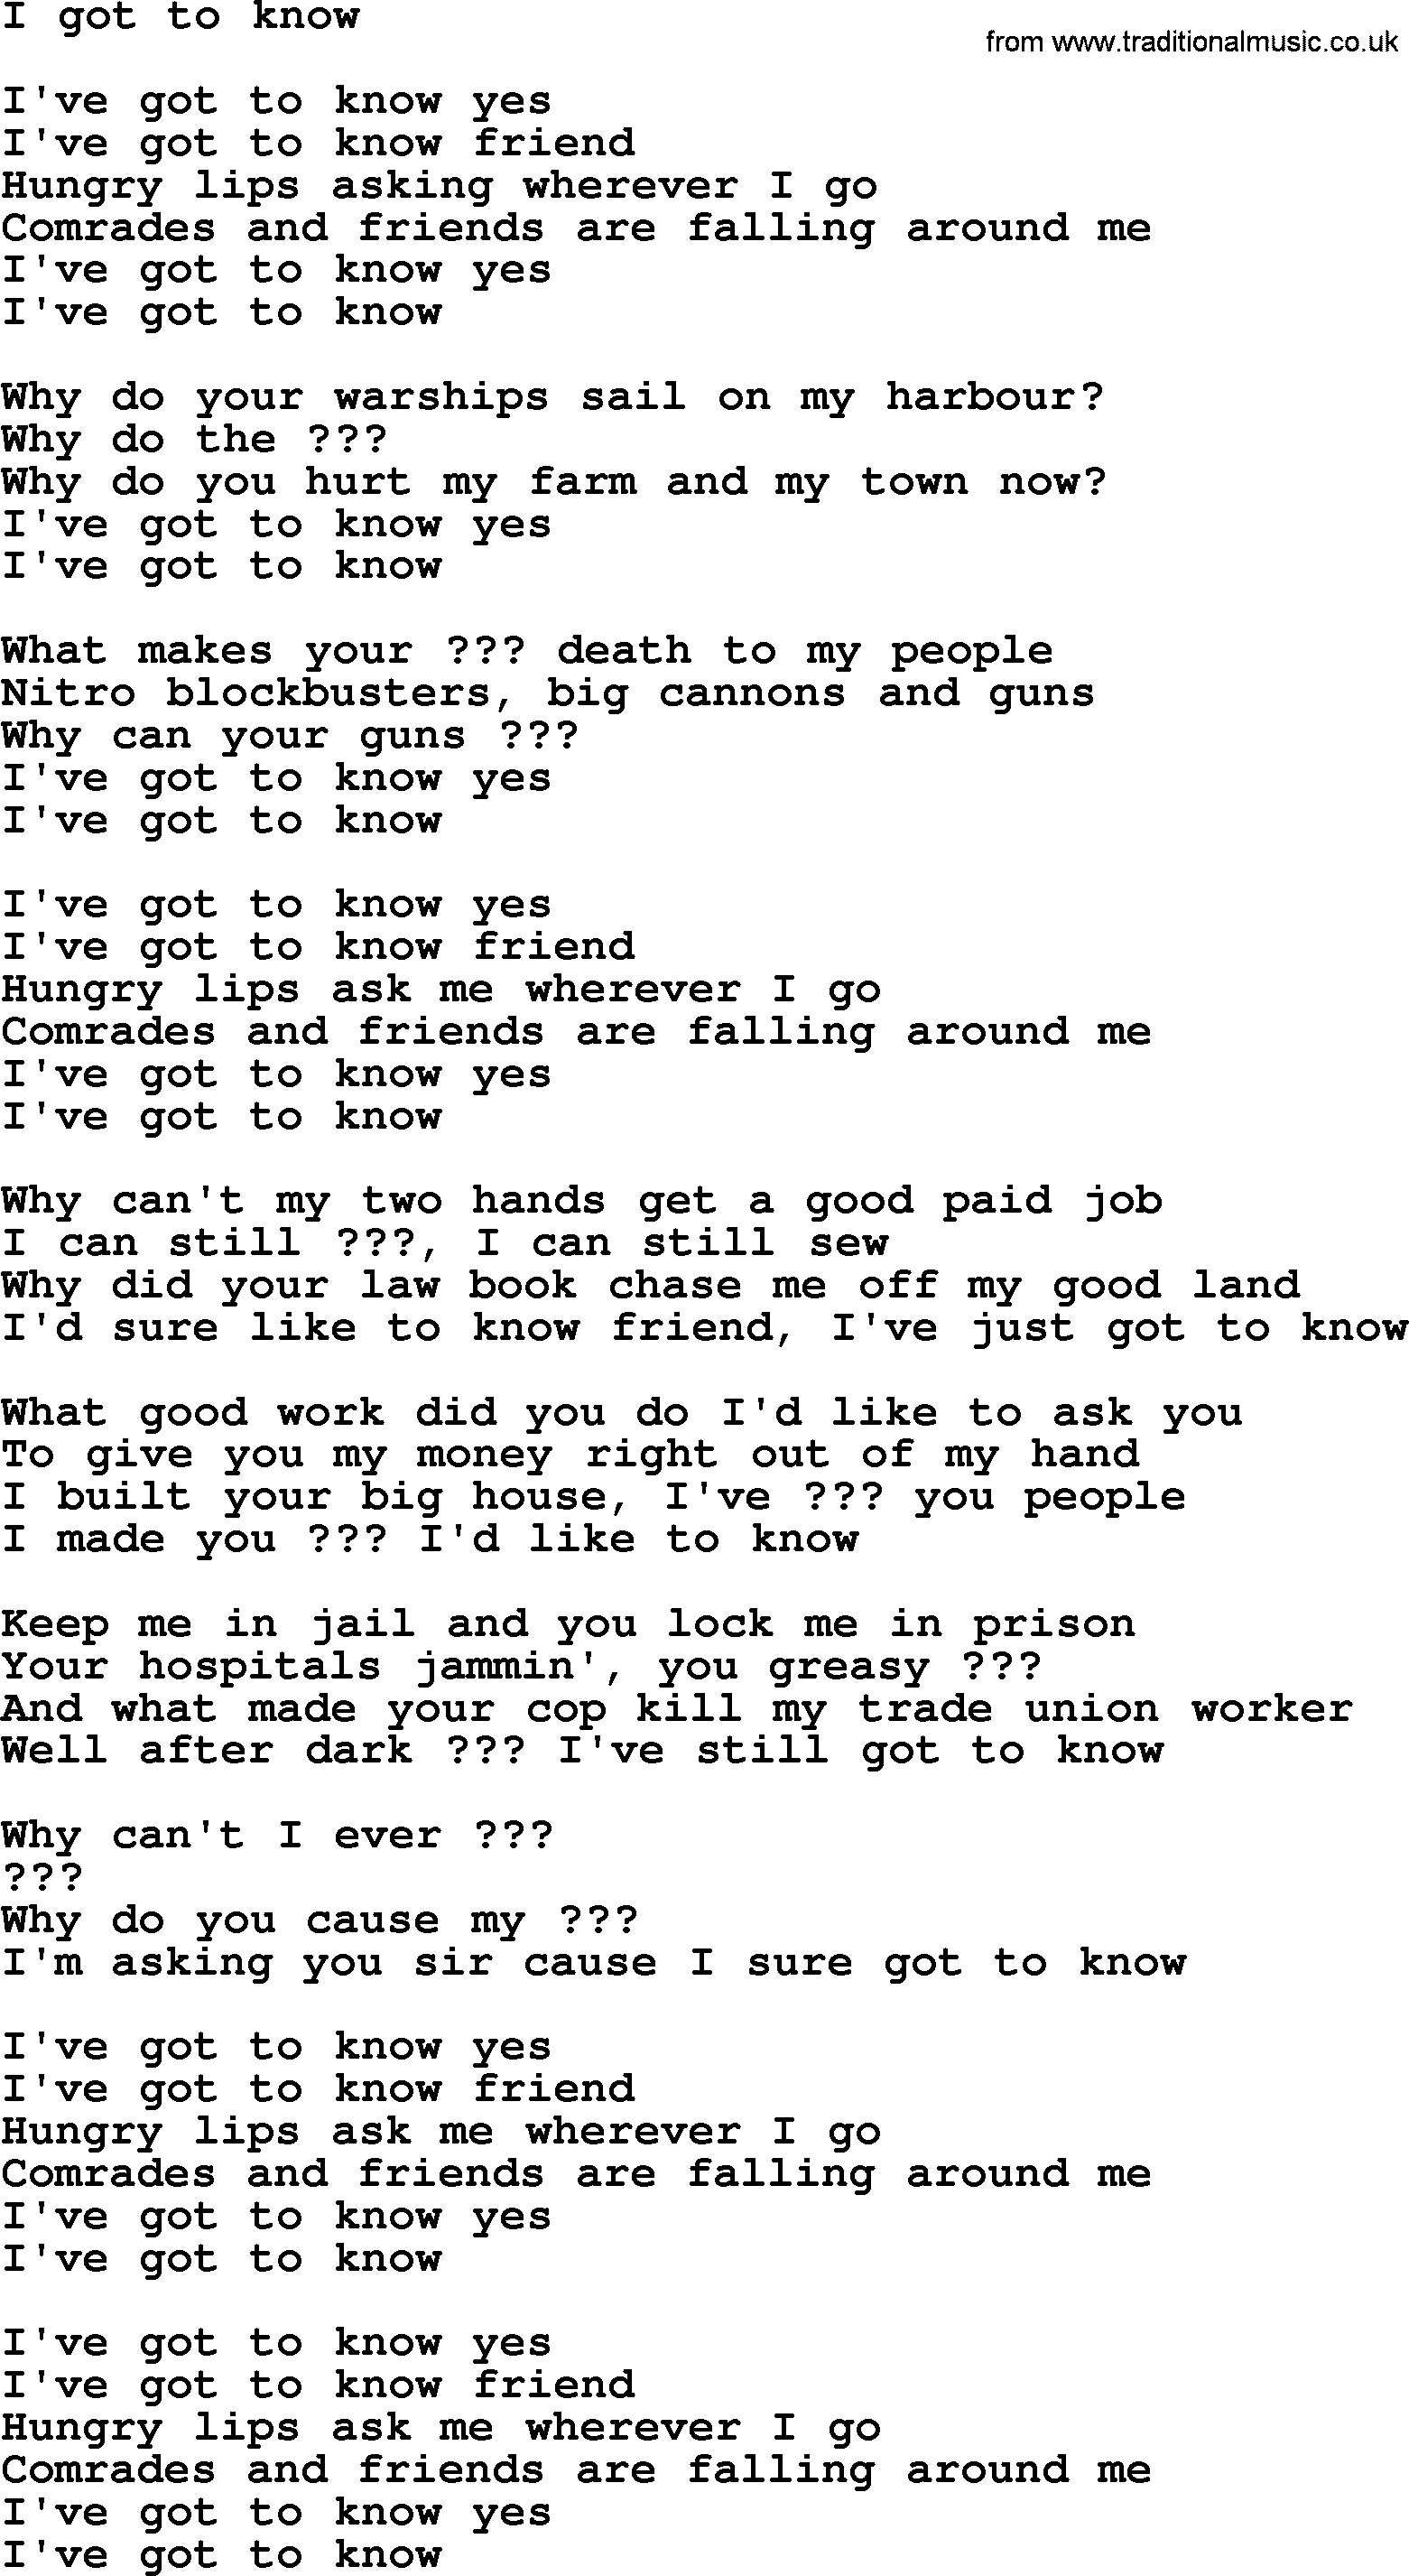 Bruce Springsteen song: I Got To Know lyrics